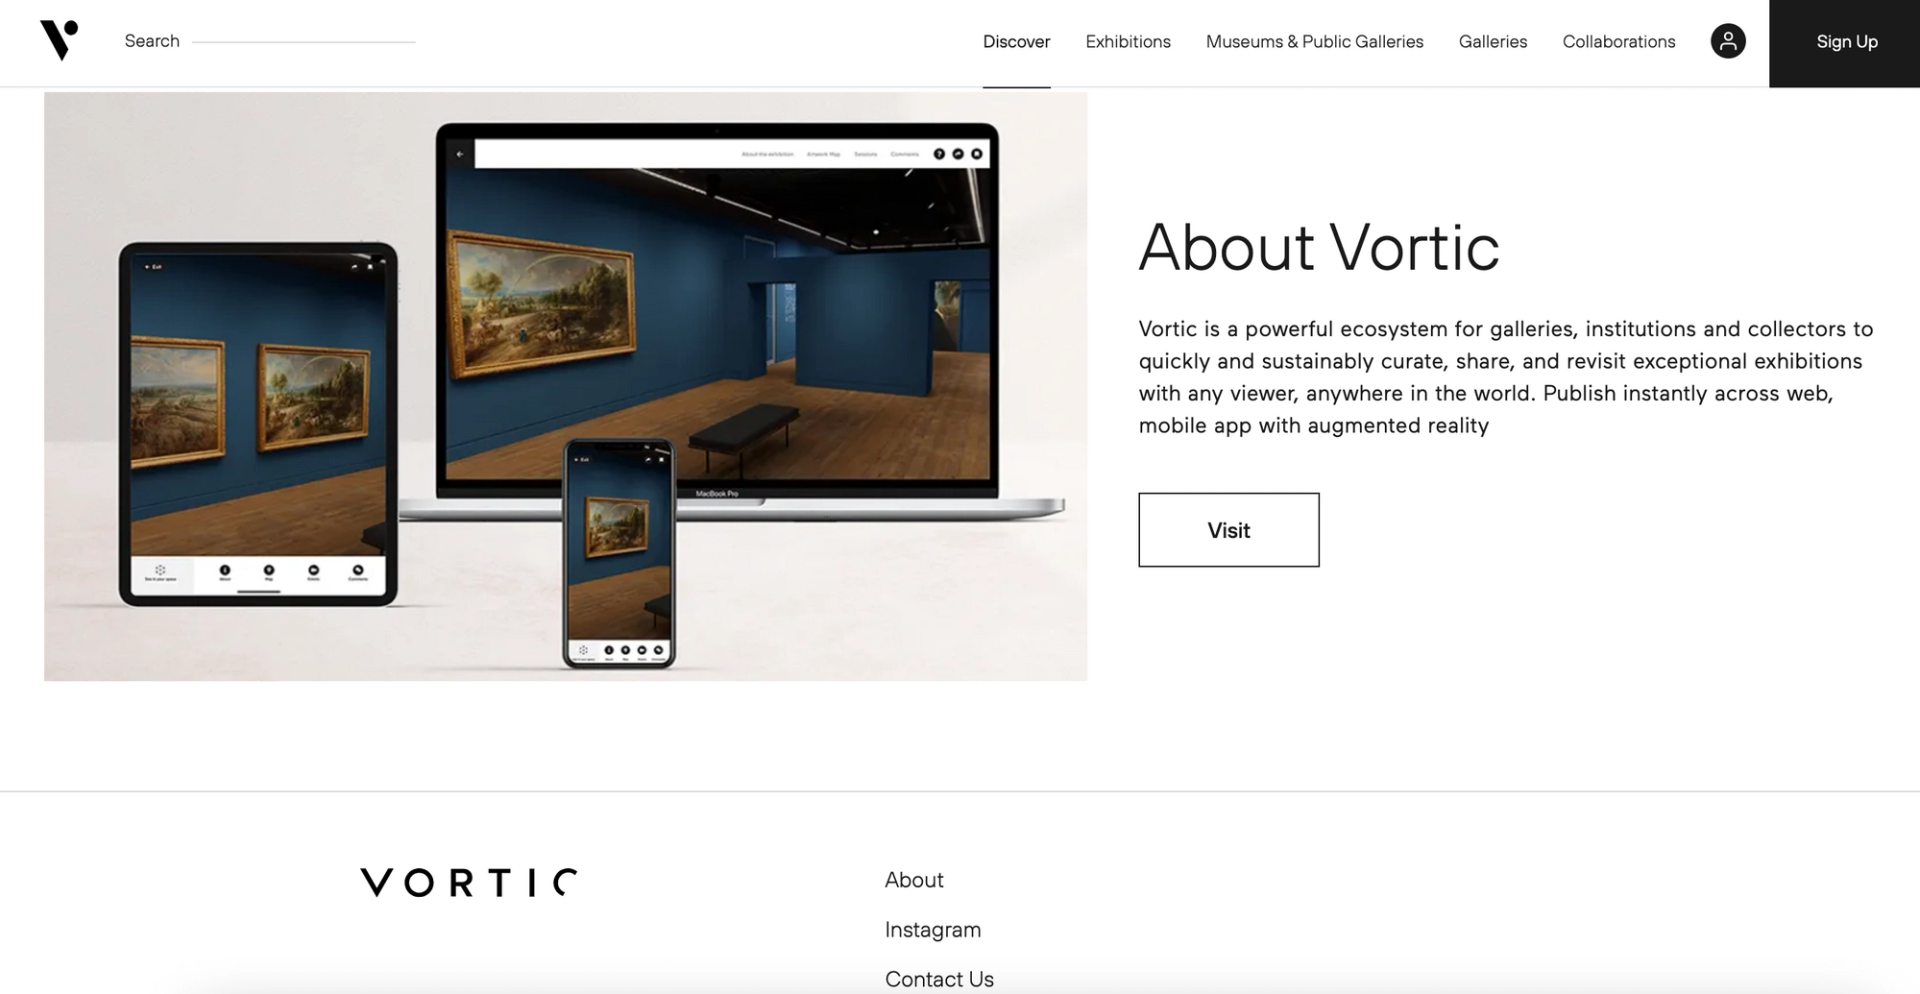 A screenshot of the landing page for the platform Vortic, specifically its "About Vortic" section. It shows an installation view of an art gallery, displayed on a tablet, a cellphone and a laptop.